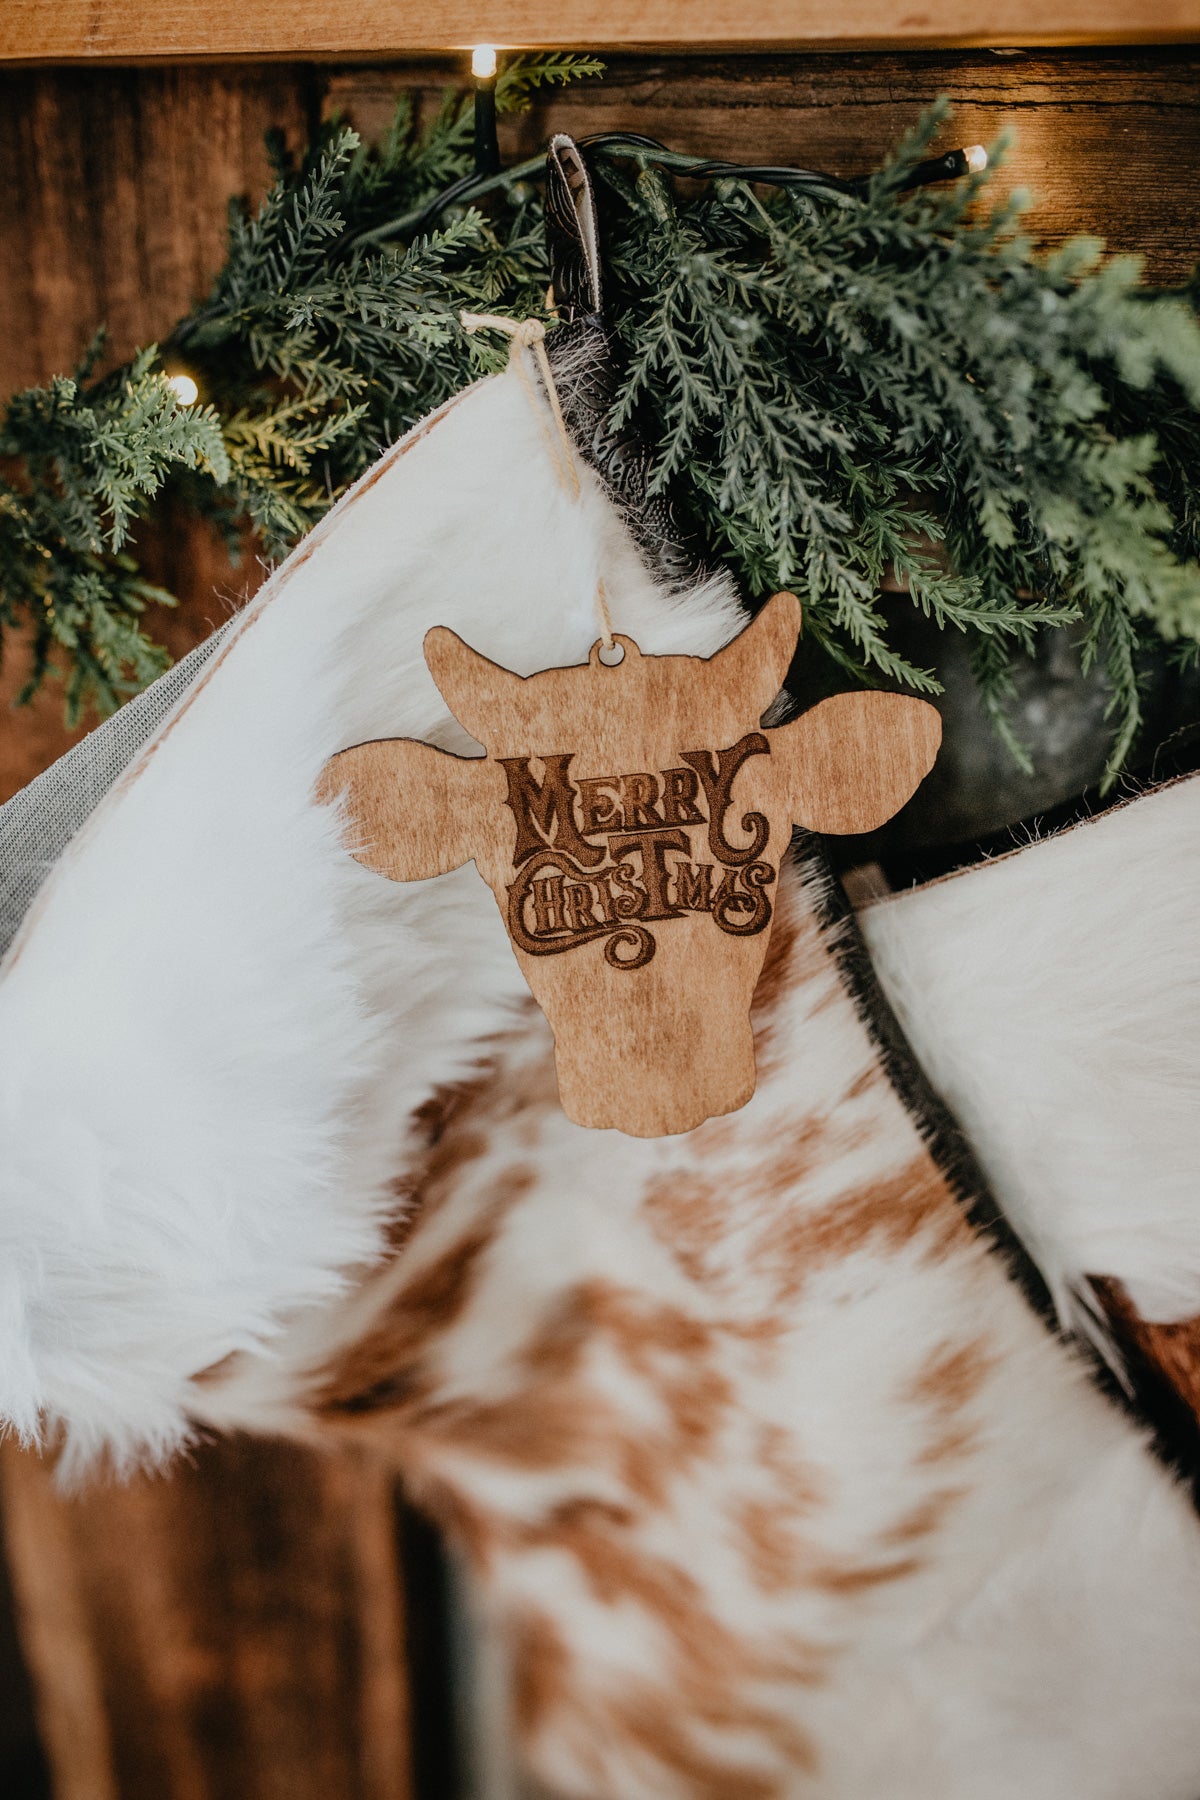 "Merry Christmas" Wooden Cow Ornament